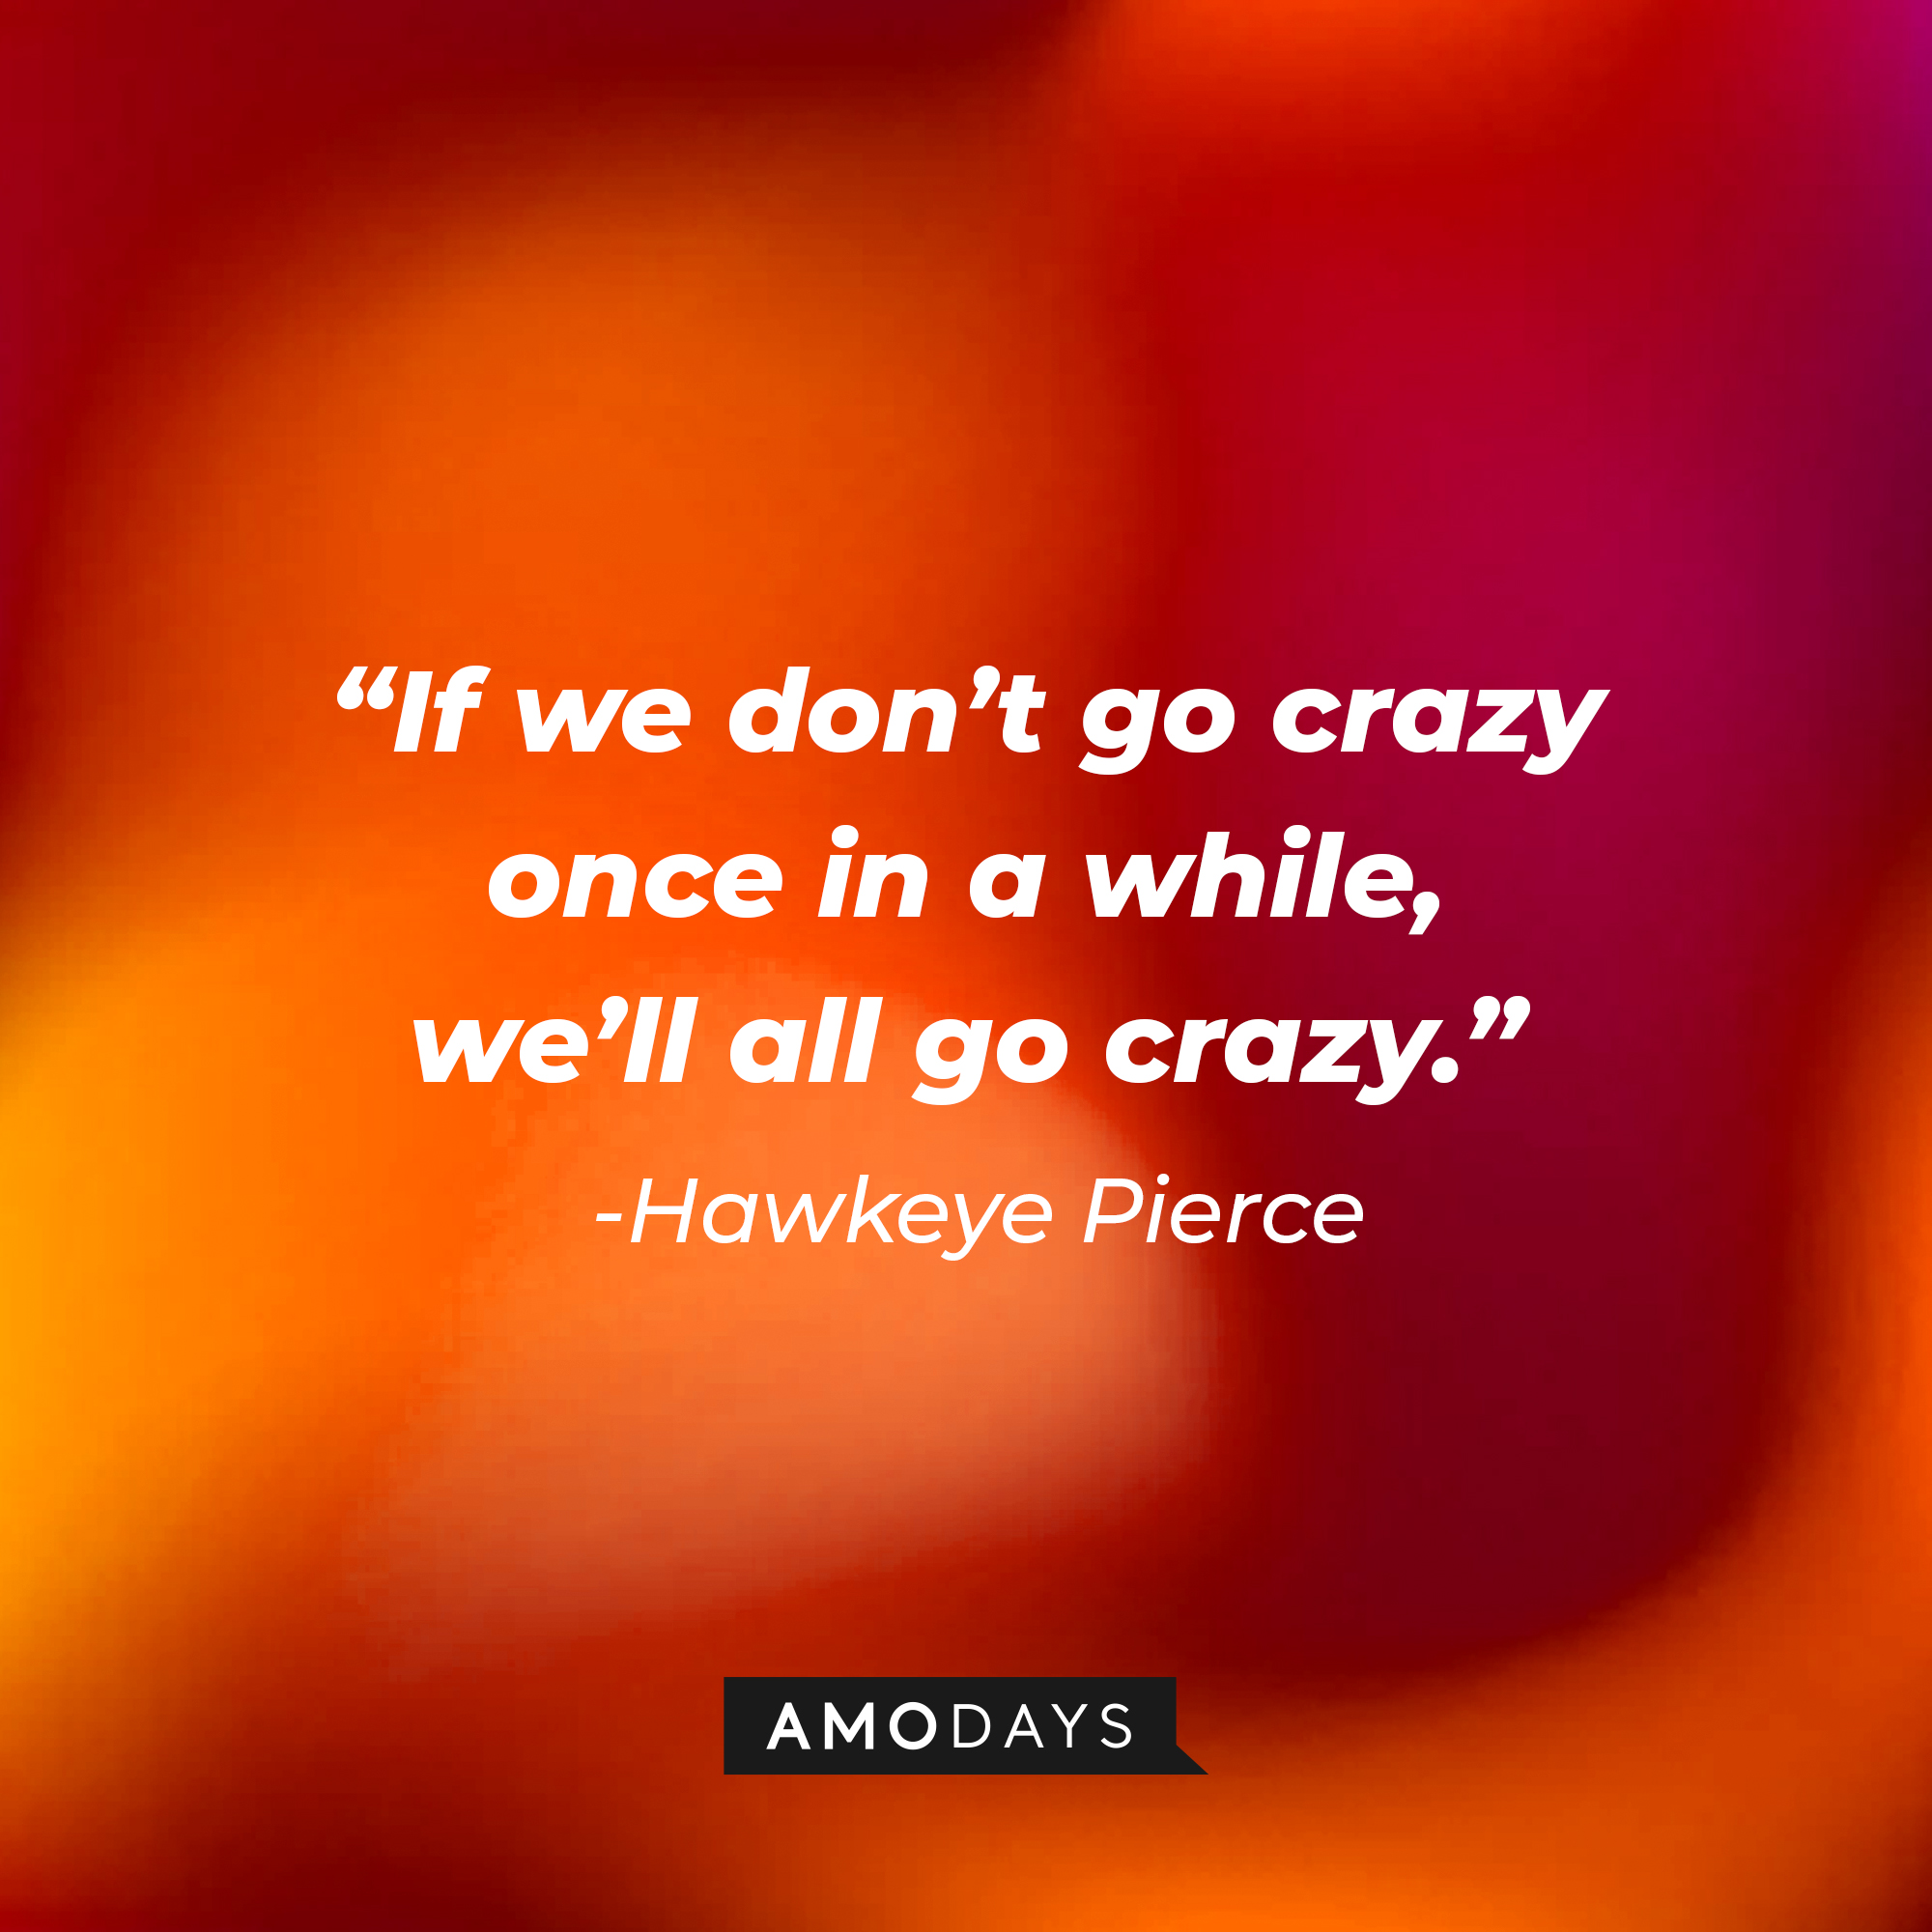 Hawkeye Pierce’s quote: “If we don’t go crazy once in a while, we’ll all go crazy.” | Source: AmoDays